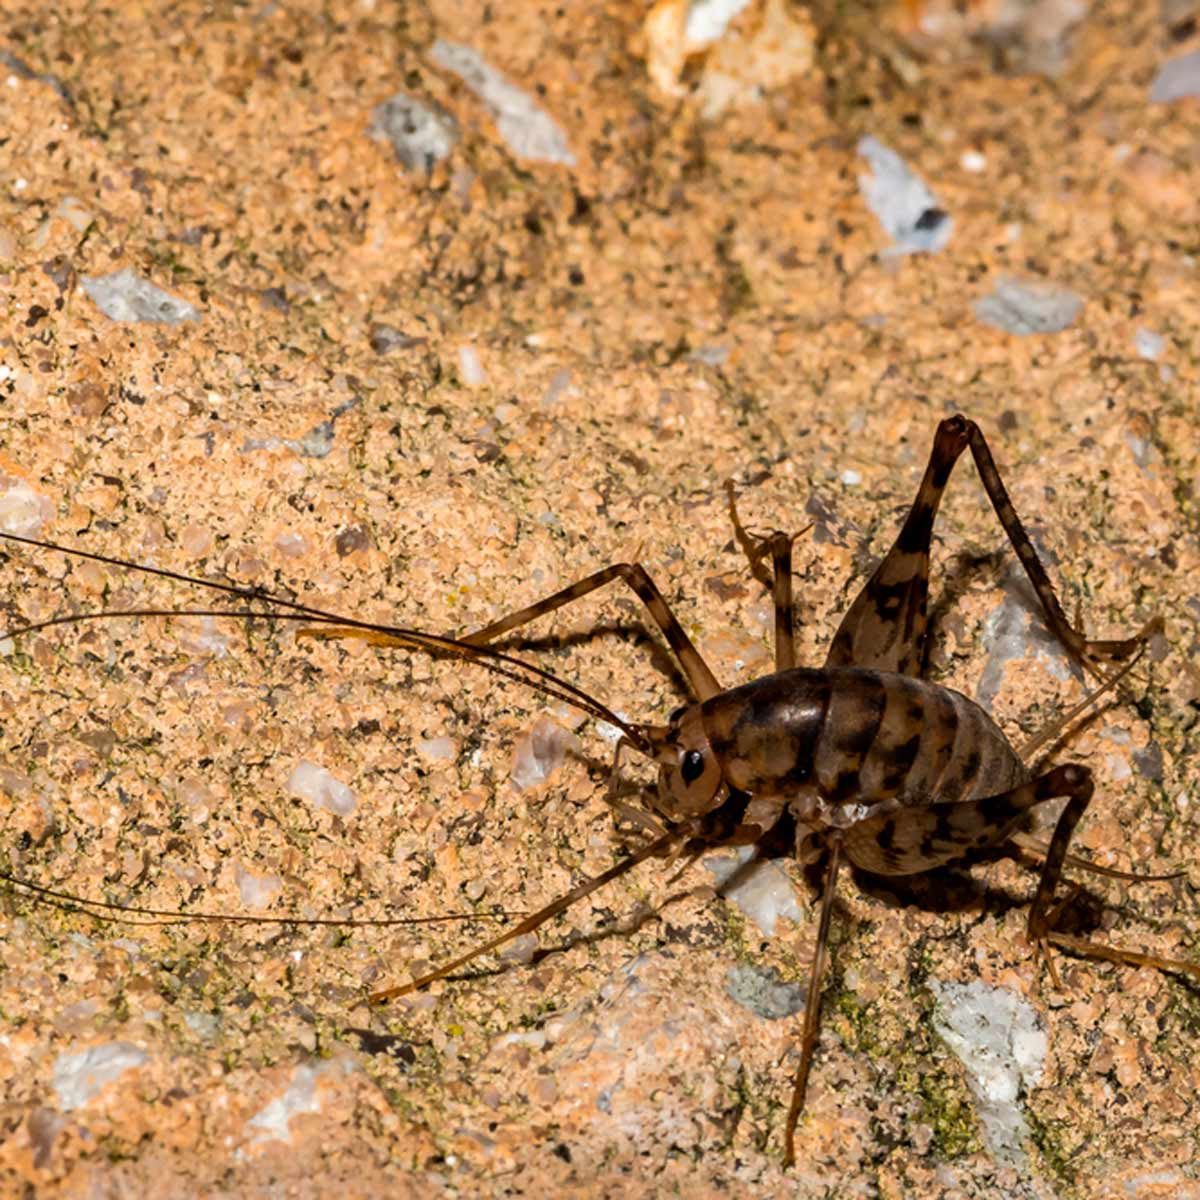 What is a Spider Cricket? | Family Handyman